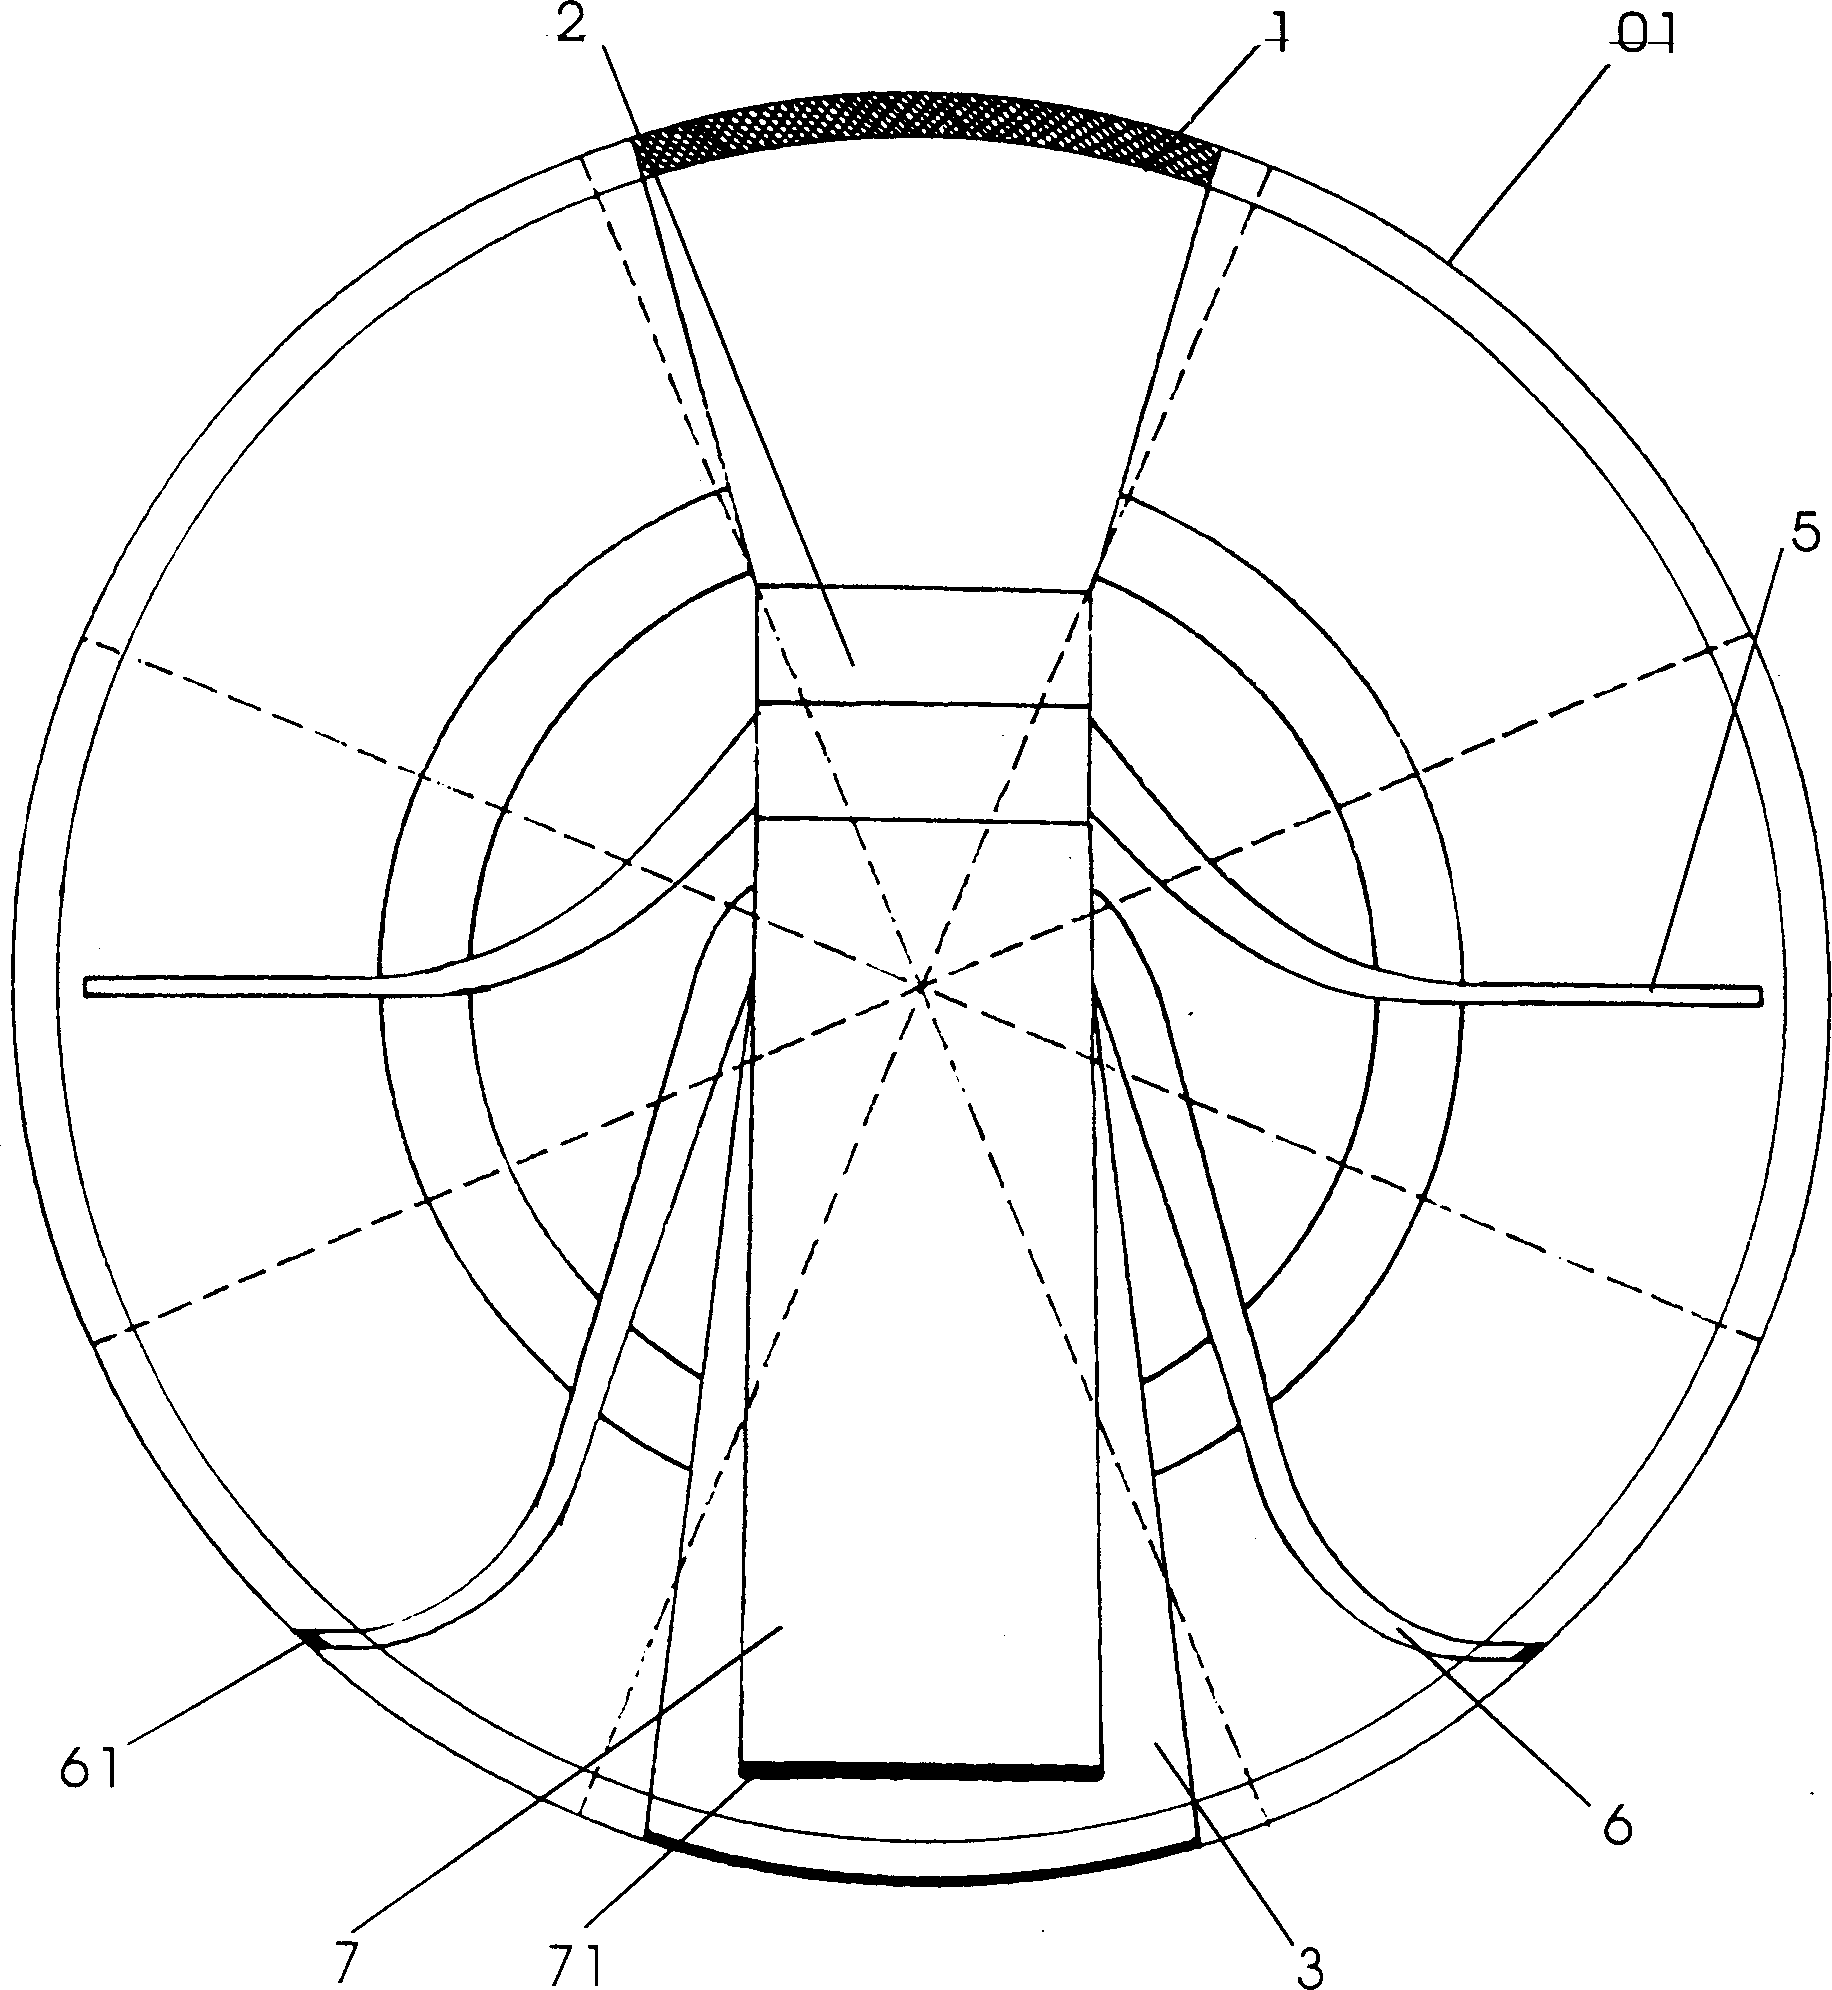 Structure of controlling flying posture of aircraft